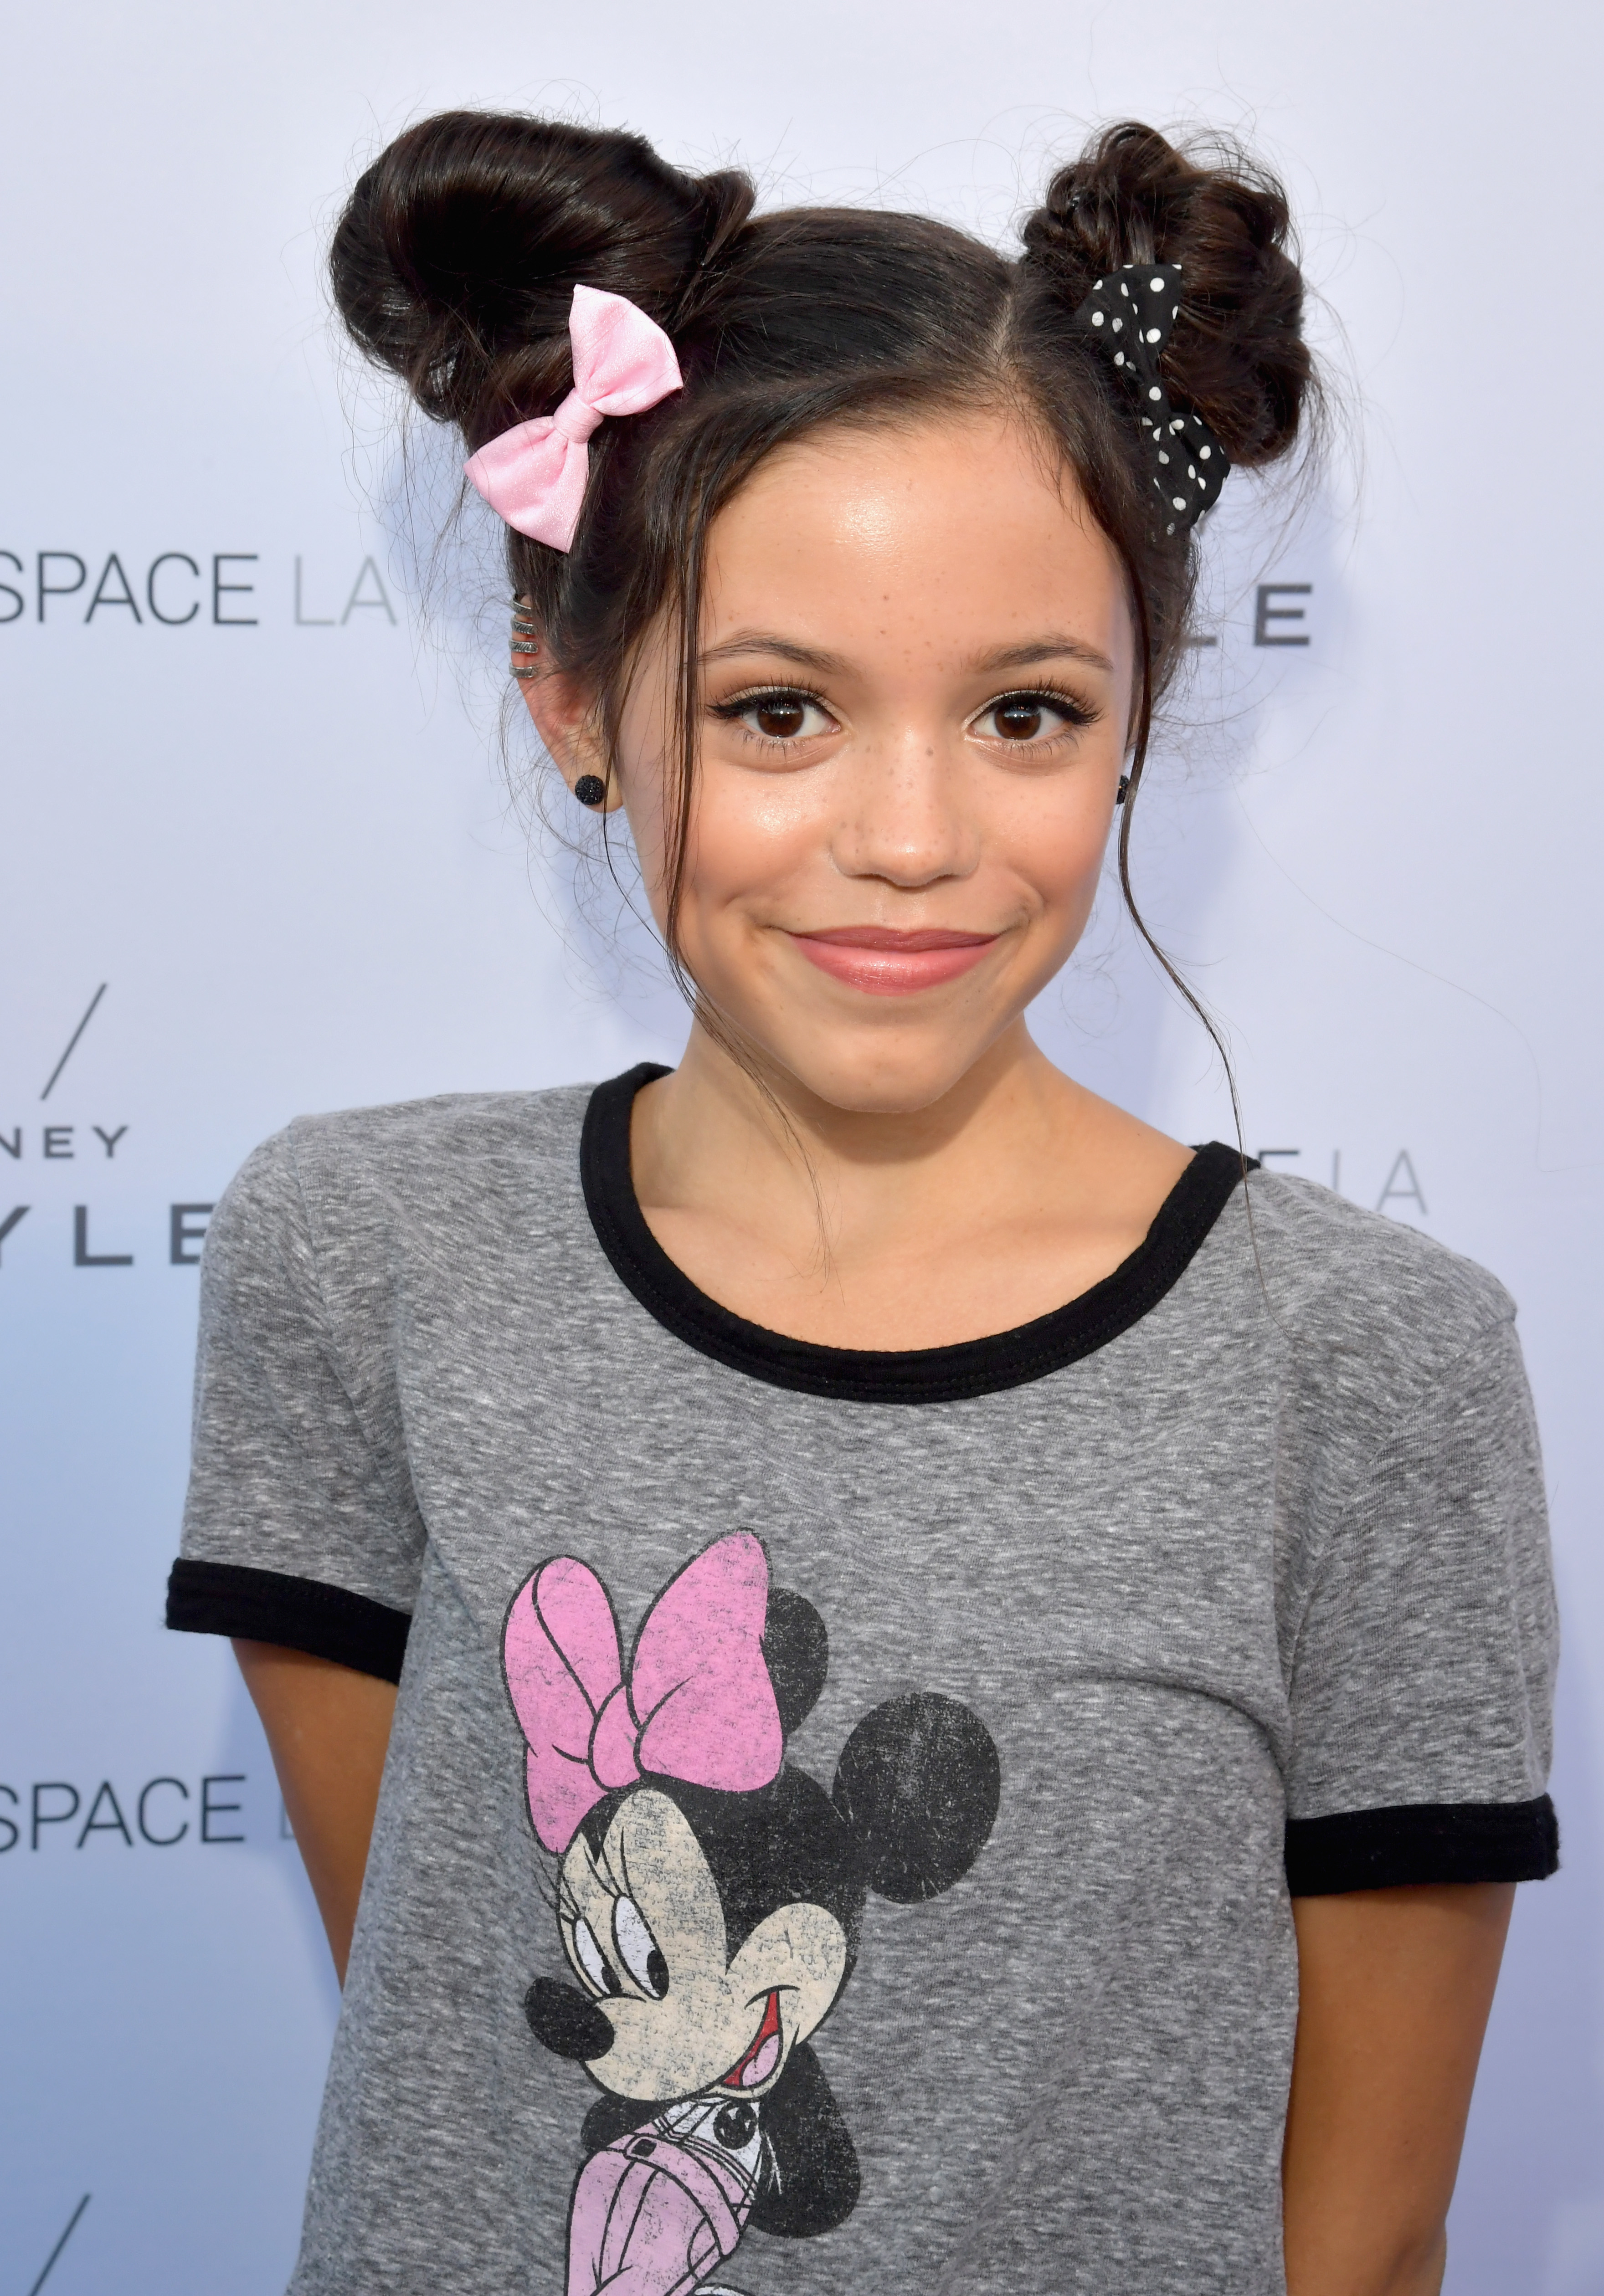 Close-up of Jenna as a child at a media event wearing a Mickey Mouse T-shirt and pigtails with ribbons